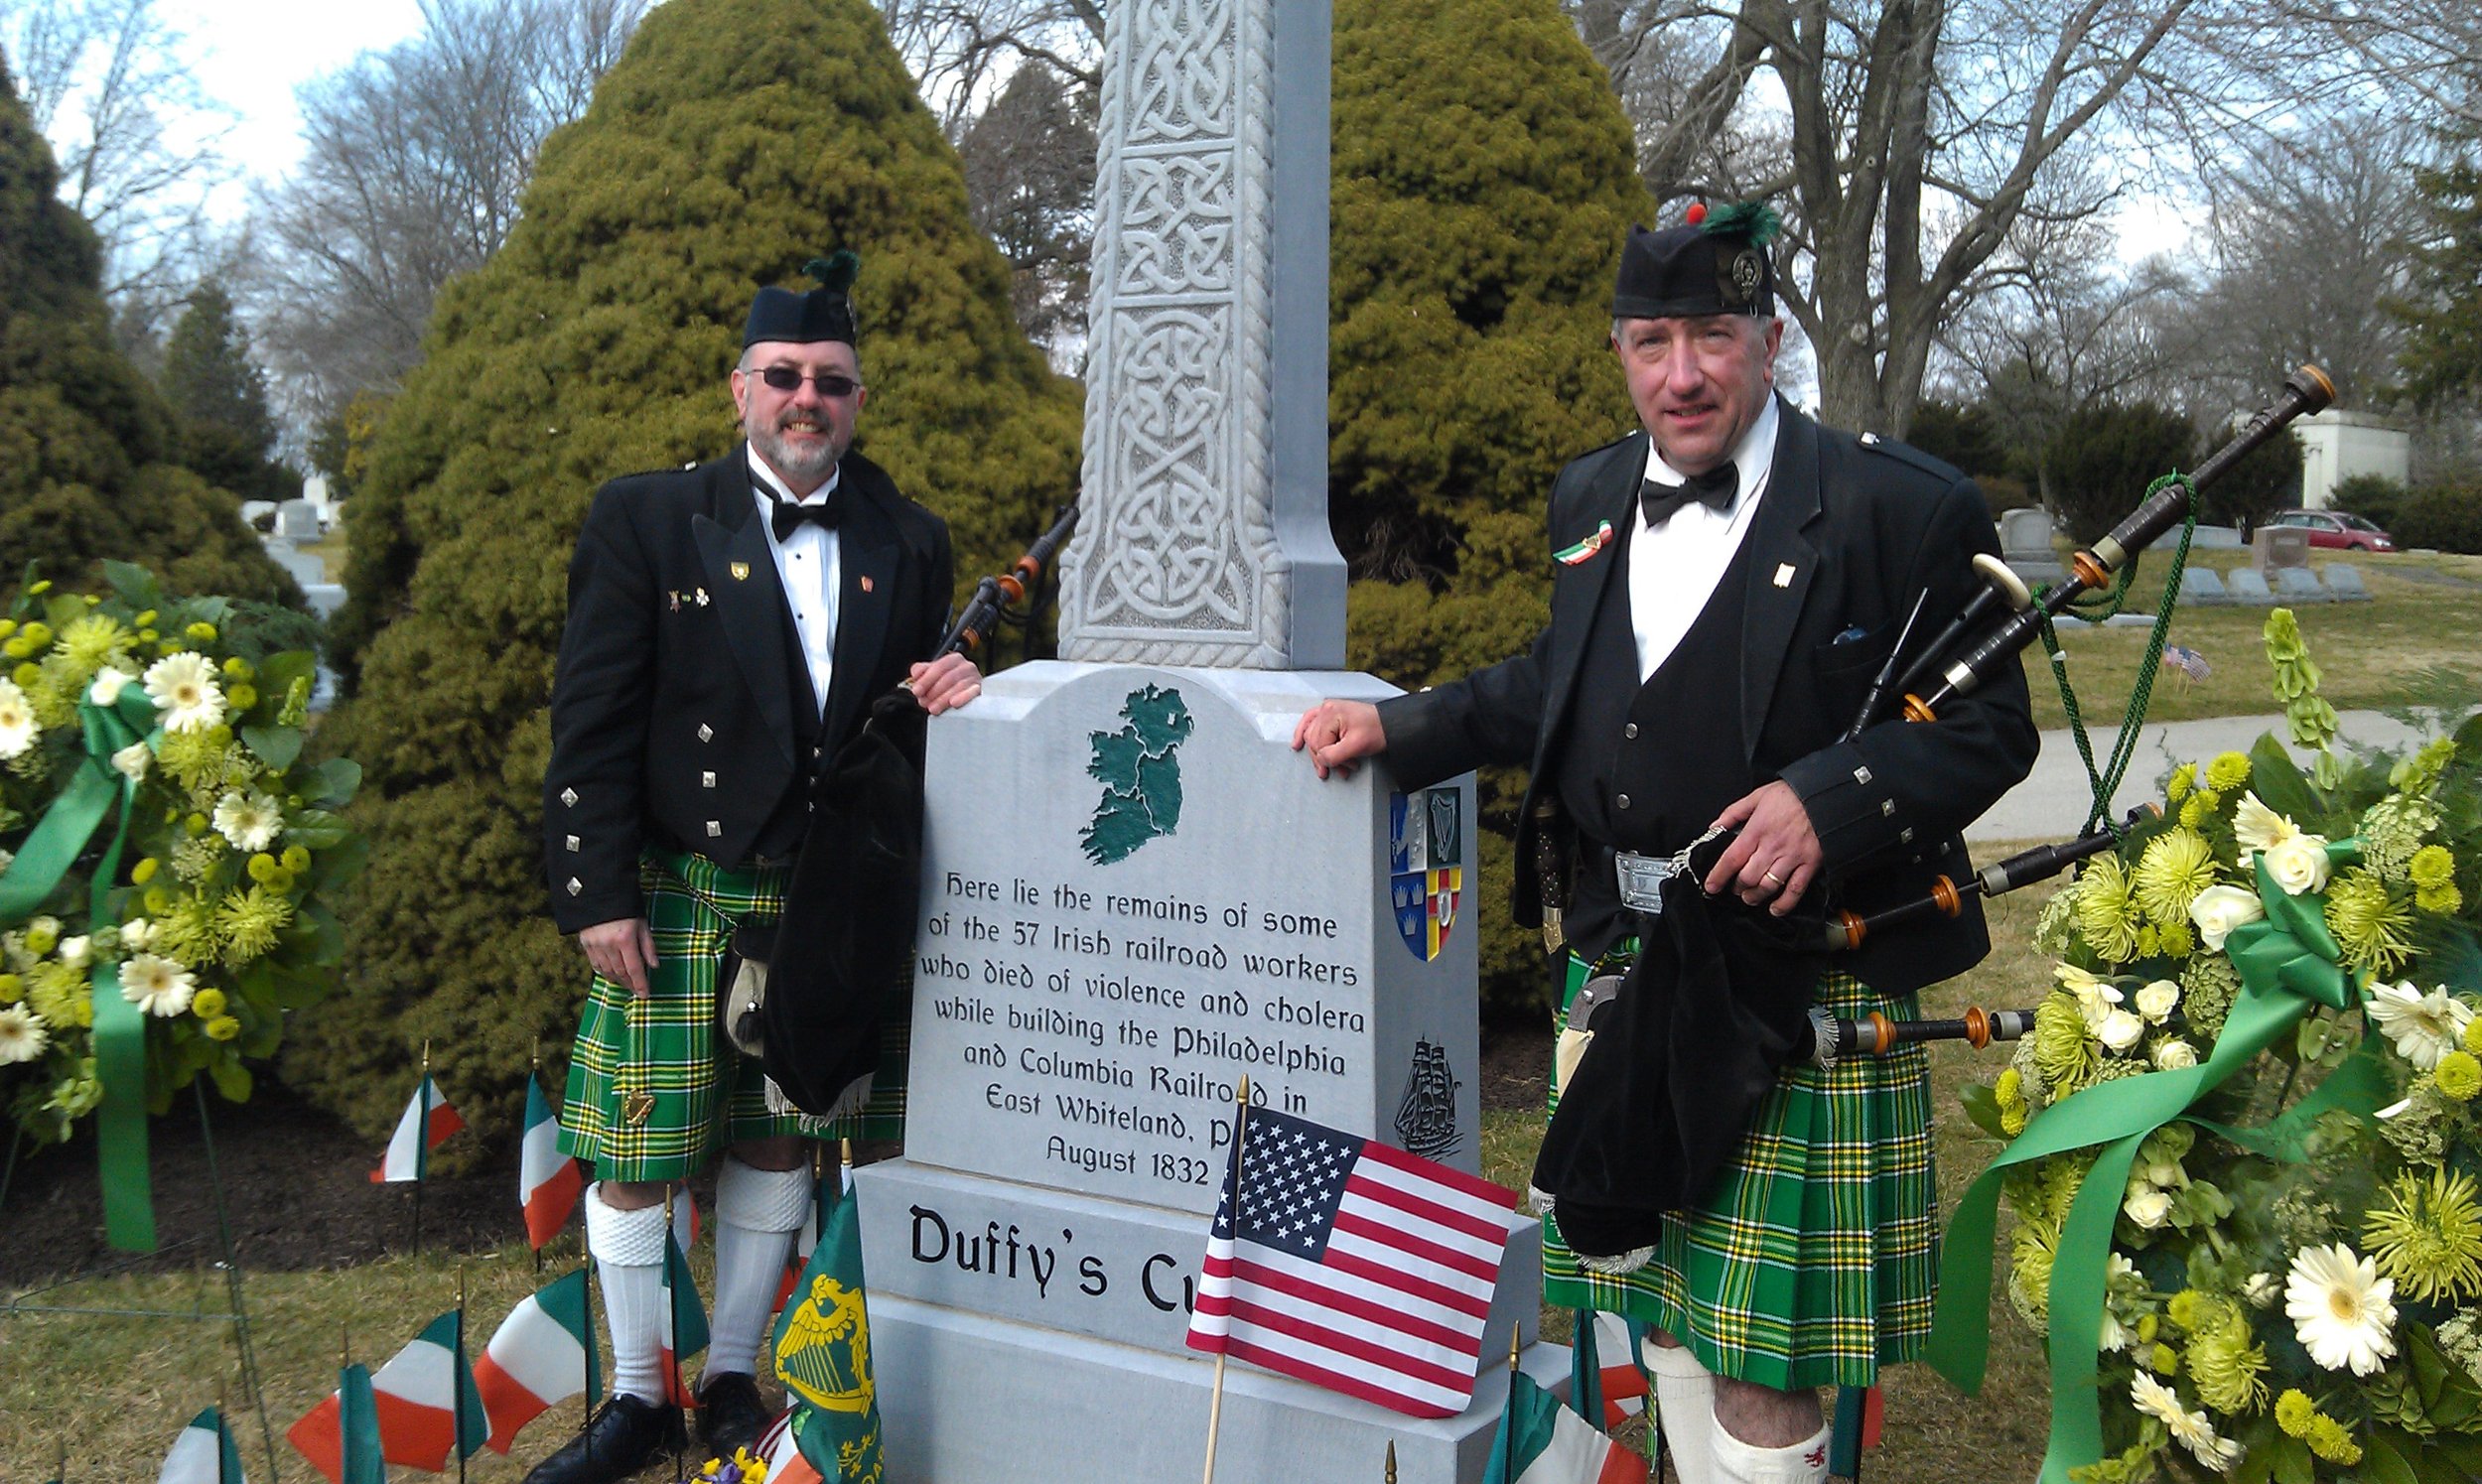  Frank (L) and Bill Watson (R) at the Duffy’s Cut memorial site 